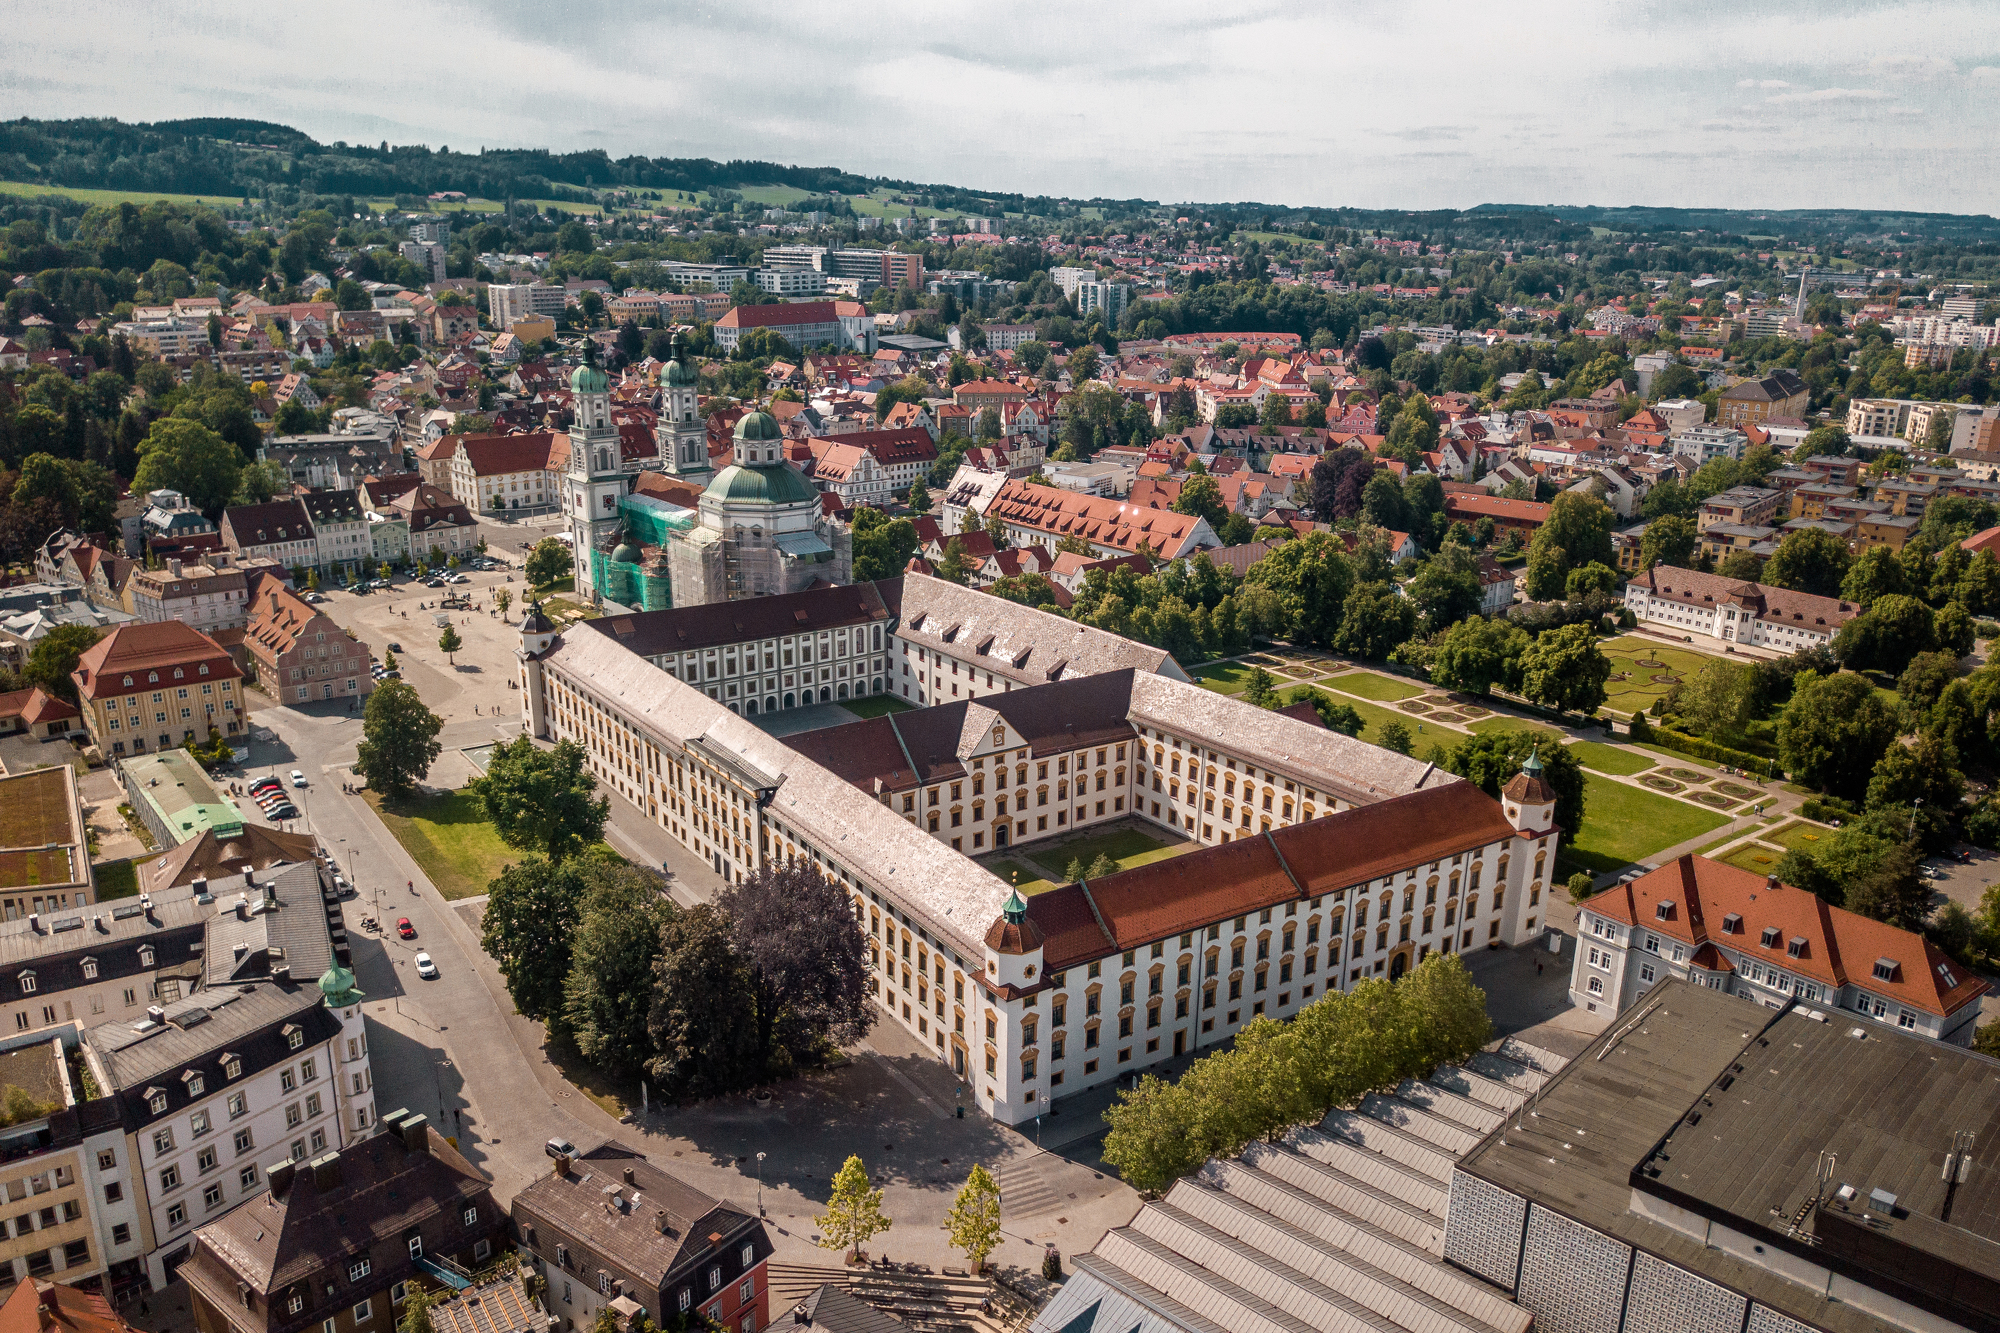 picture of the city of kempten from bird's eye view